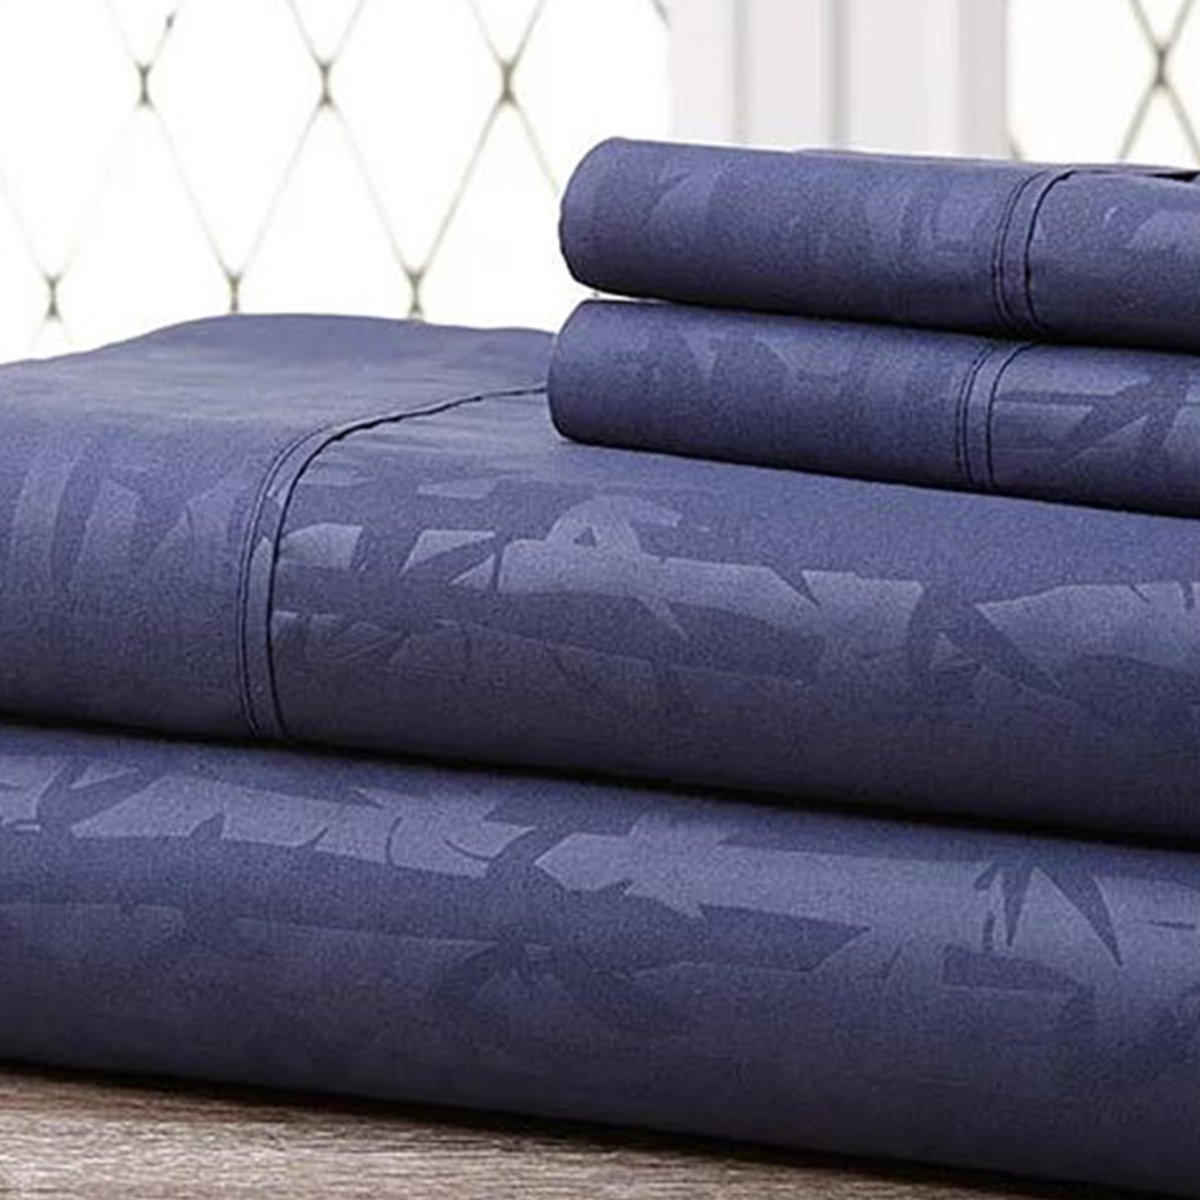 Super-soft 1600 Series Bamboo Embossed Bed Sheet, Navy - King, 4 Piece